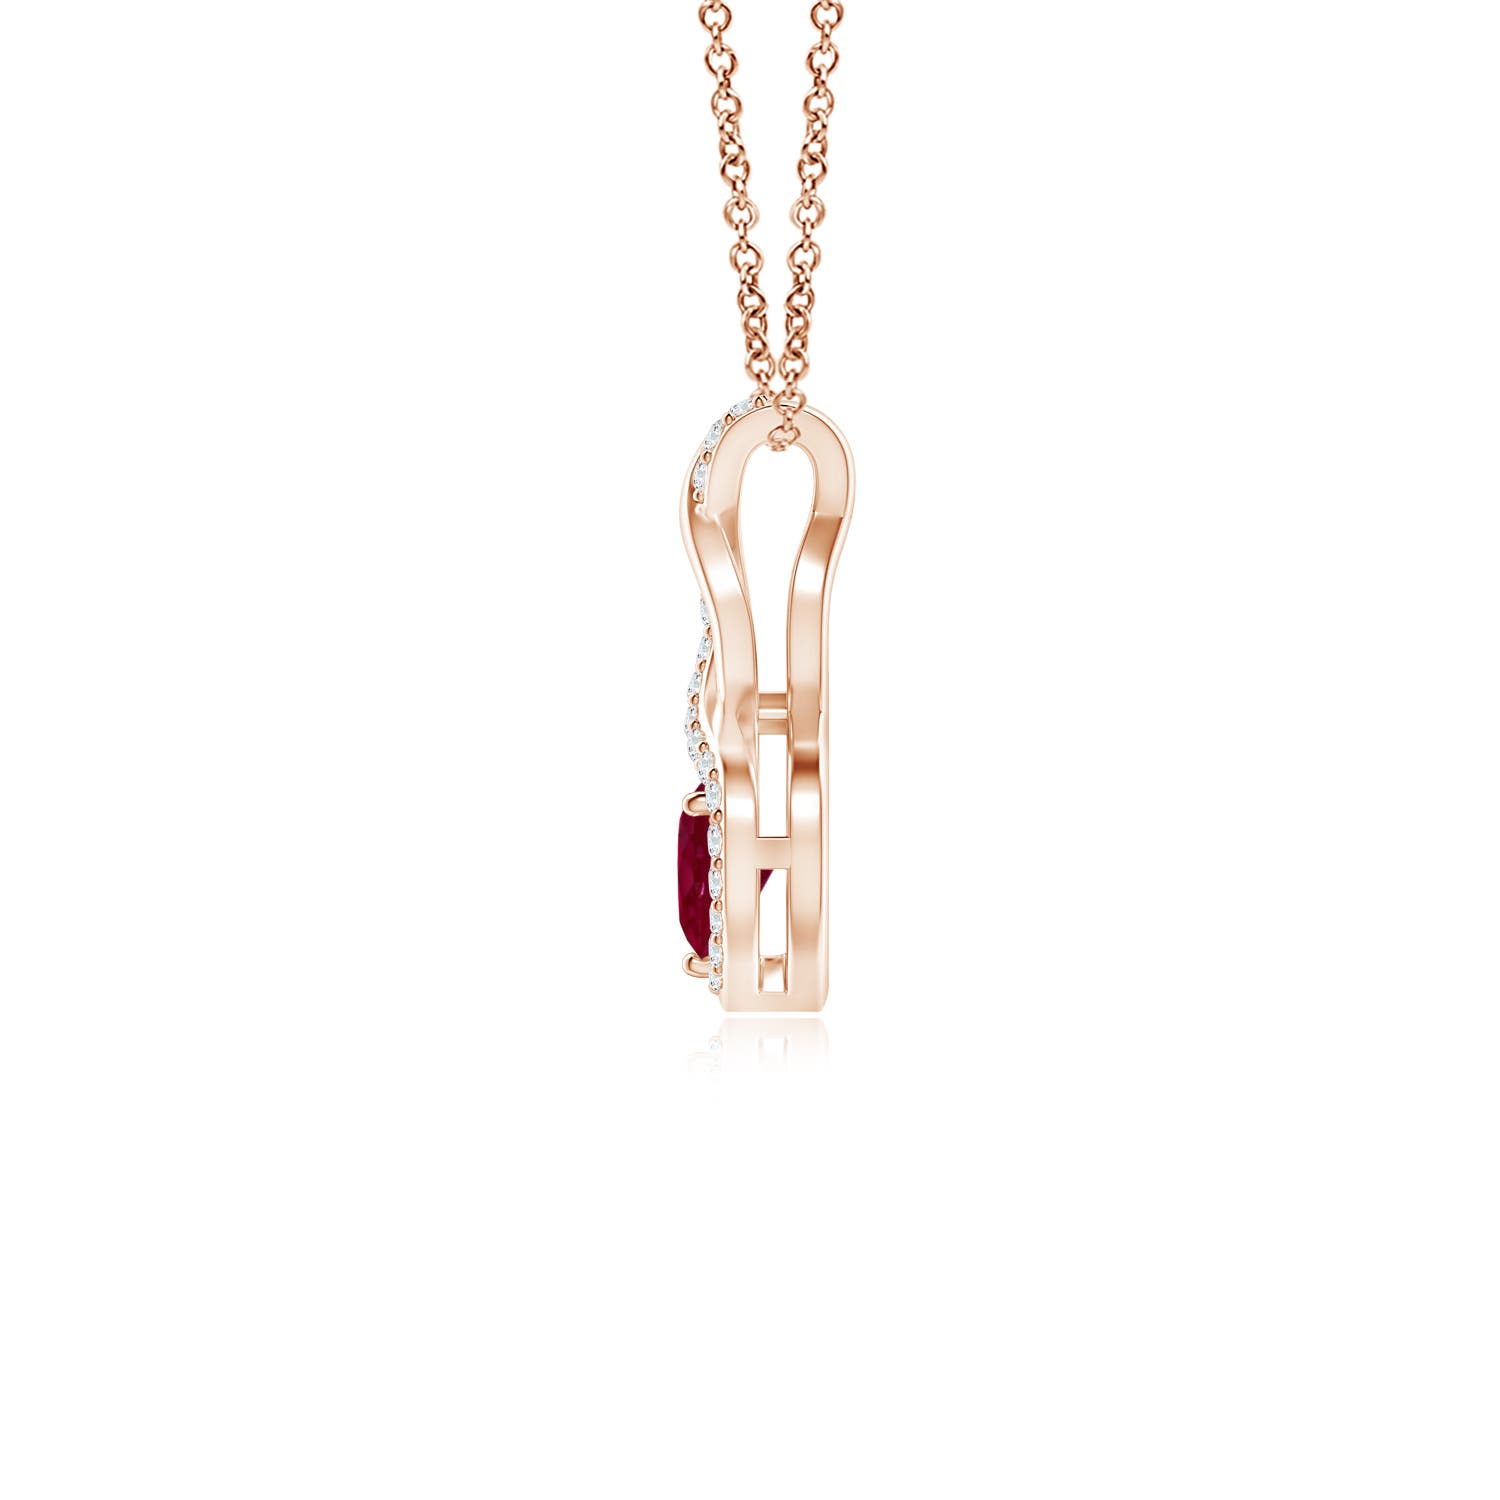 A - Ruby / 0.35 CT / 14 KT Rose Gold